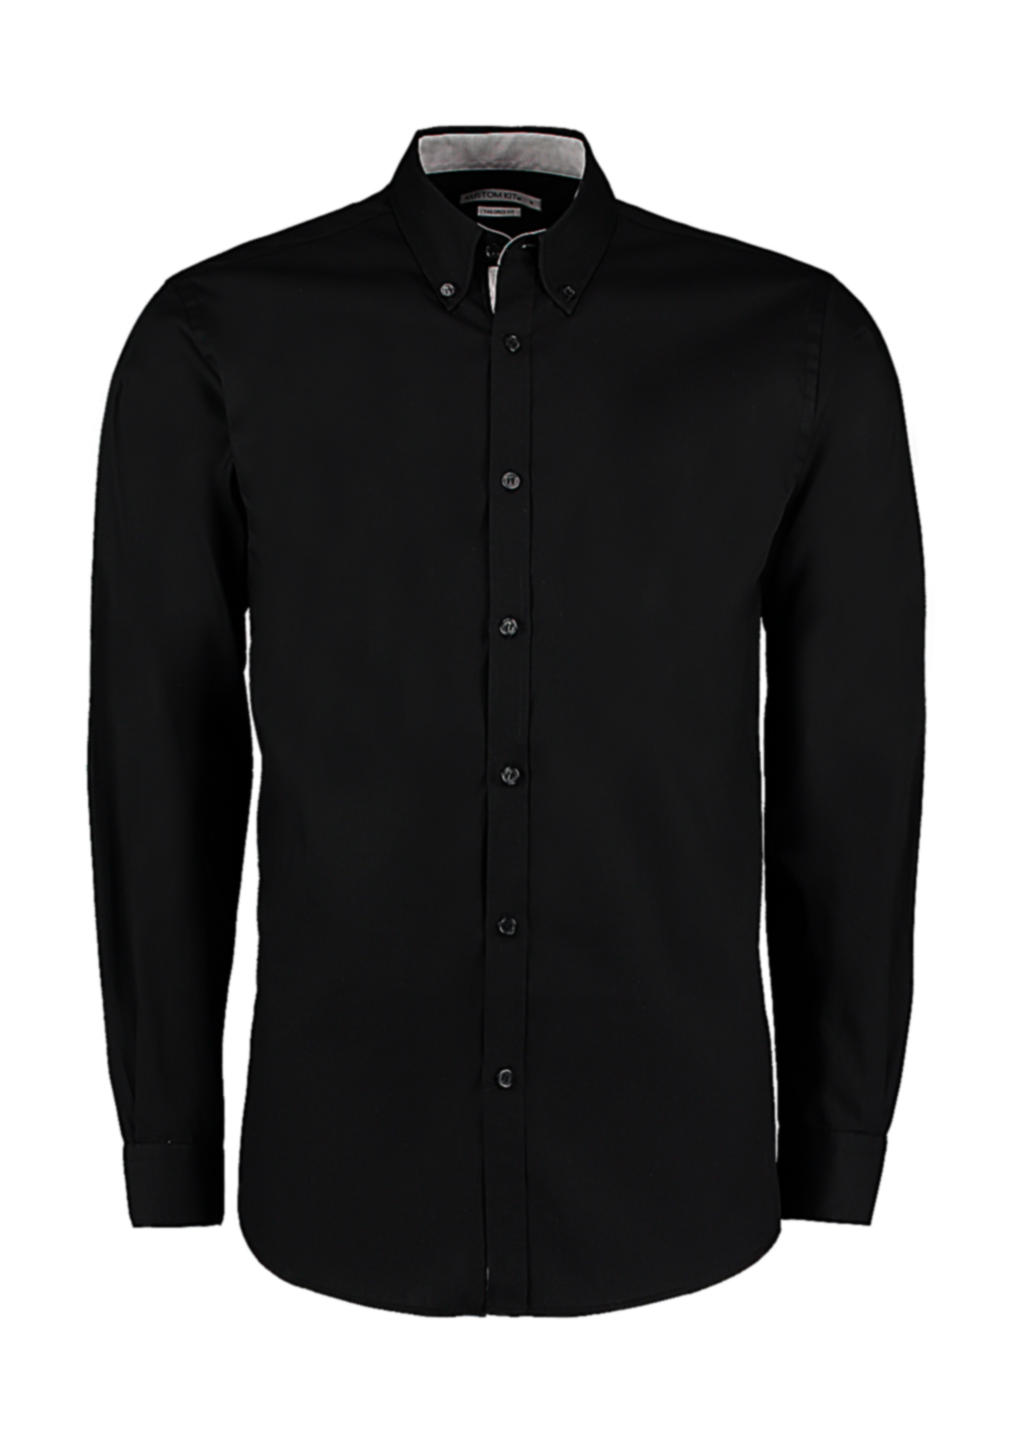  Tailored Fit Premium Contrast Oxford Shirt in Farbe Black/Silver